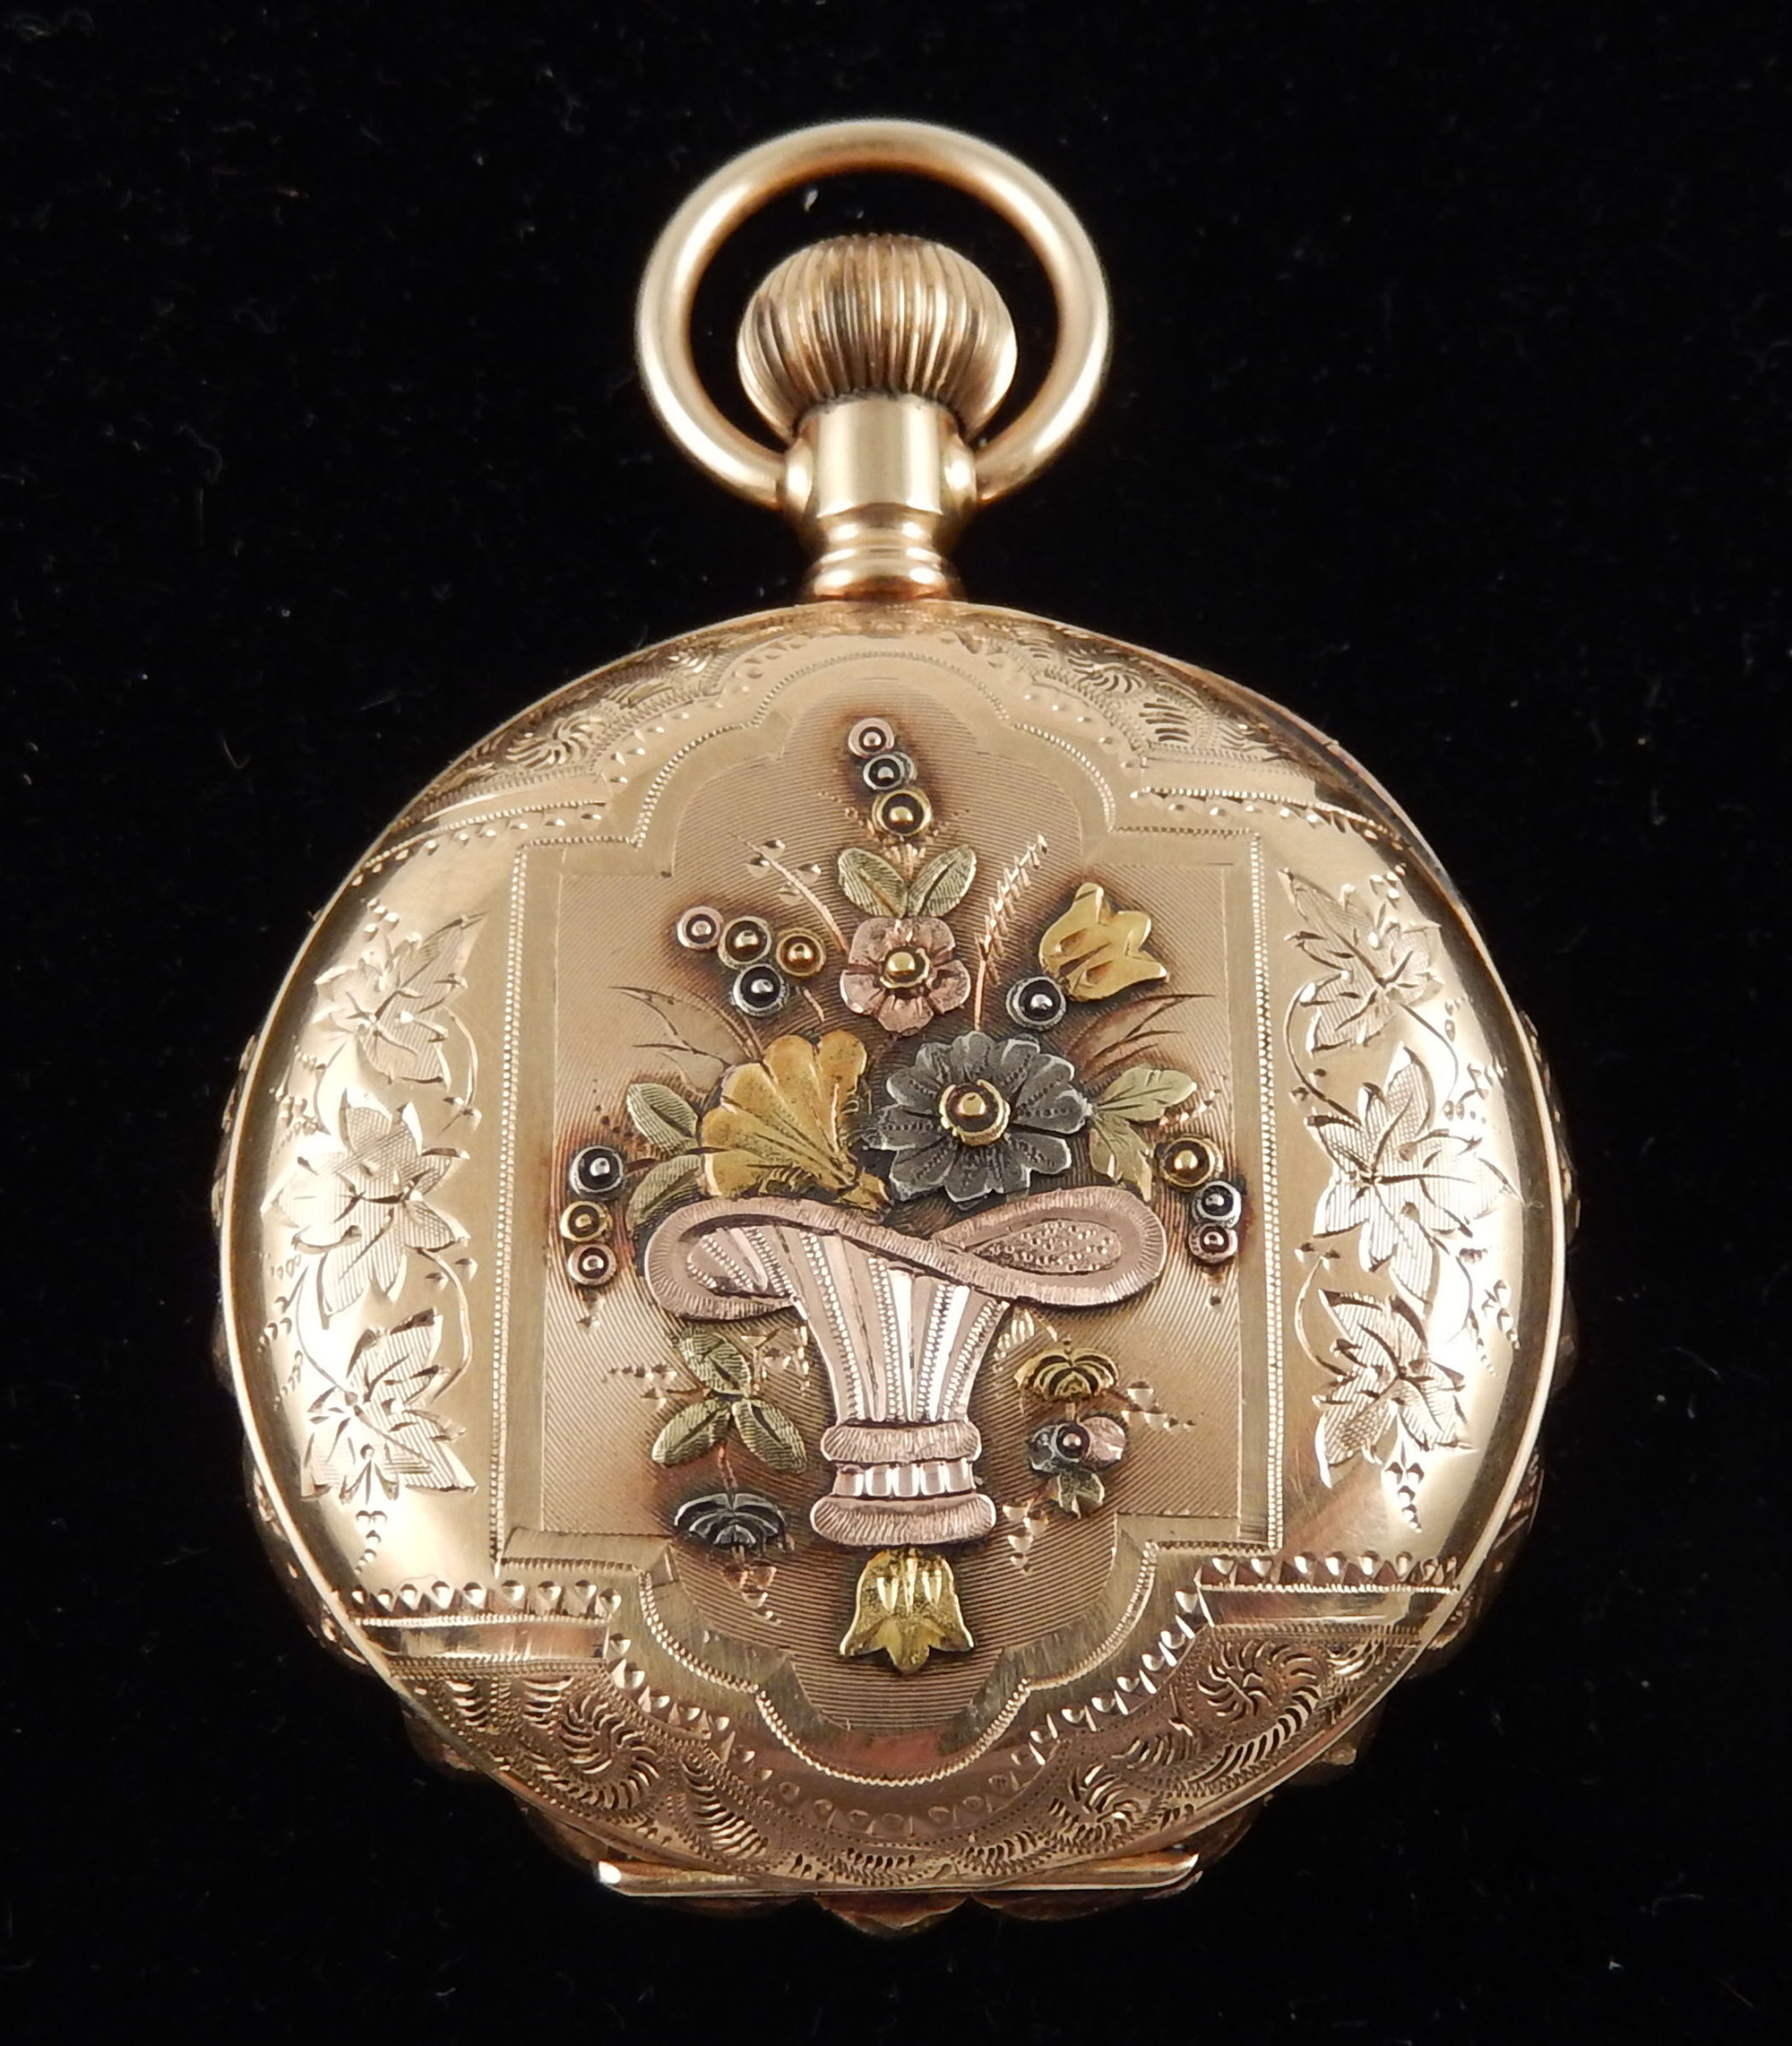 14K gold 4-color hunting pocket watch. Stephenson’s Auctioneers